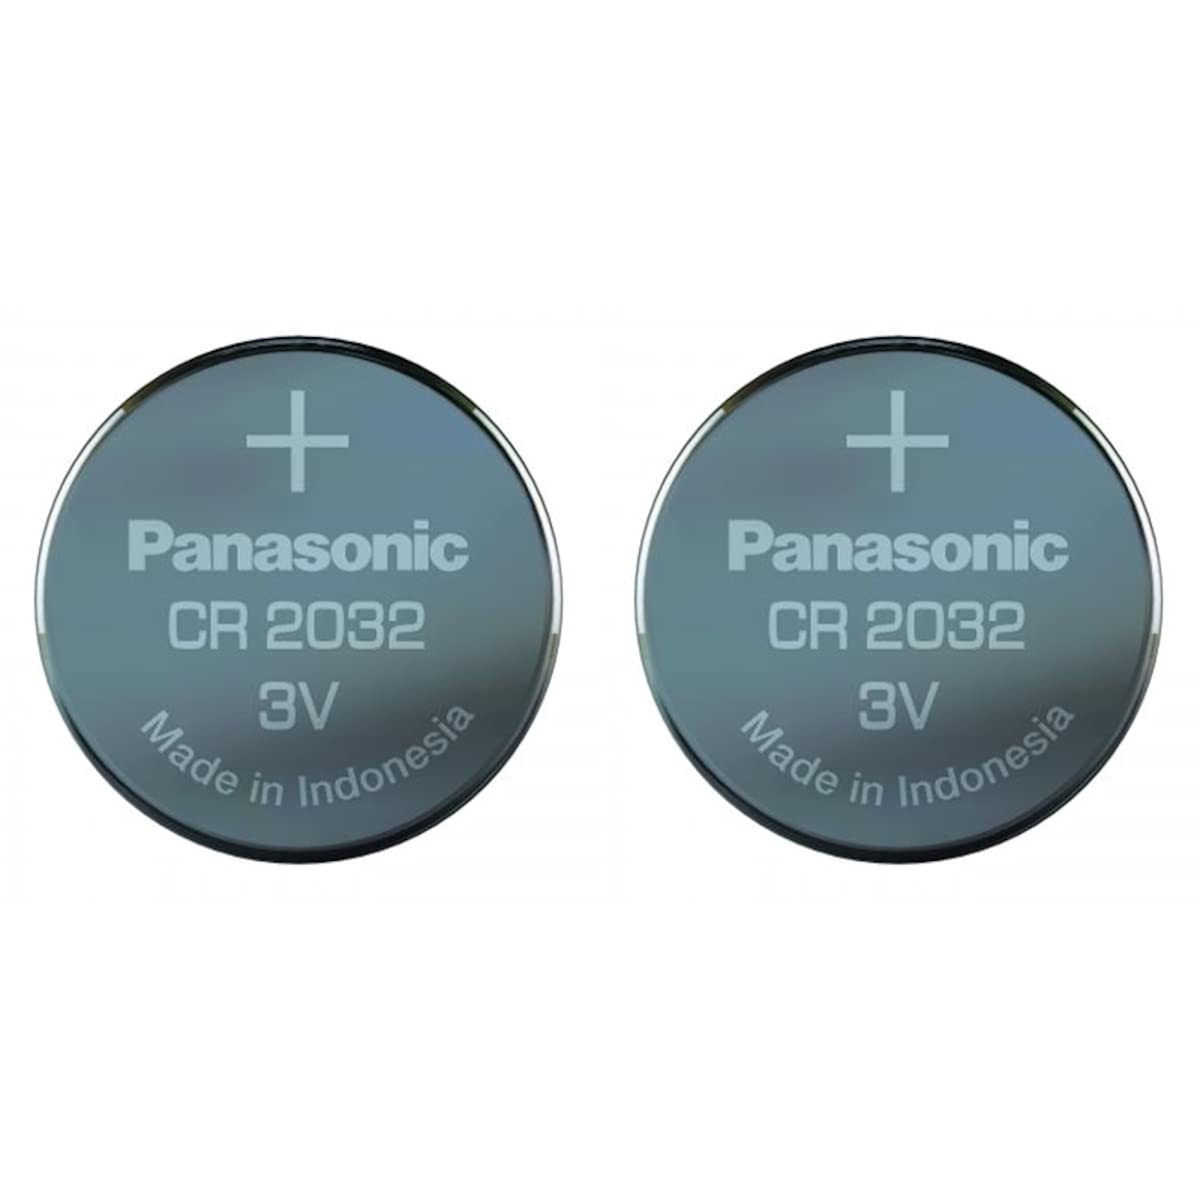 Panasonic One (1) Twin Pack (2 Batteries) CrCR2032 Lithium Coin Cell Battery 3V Blister Packed